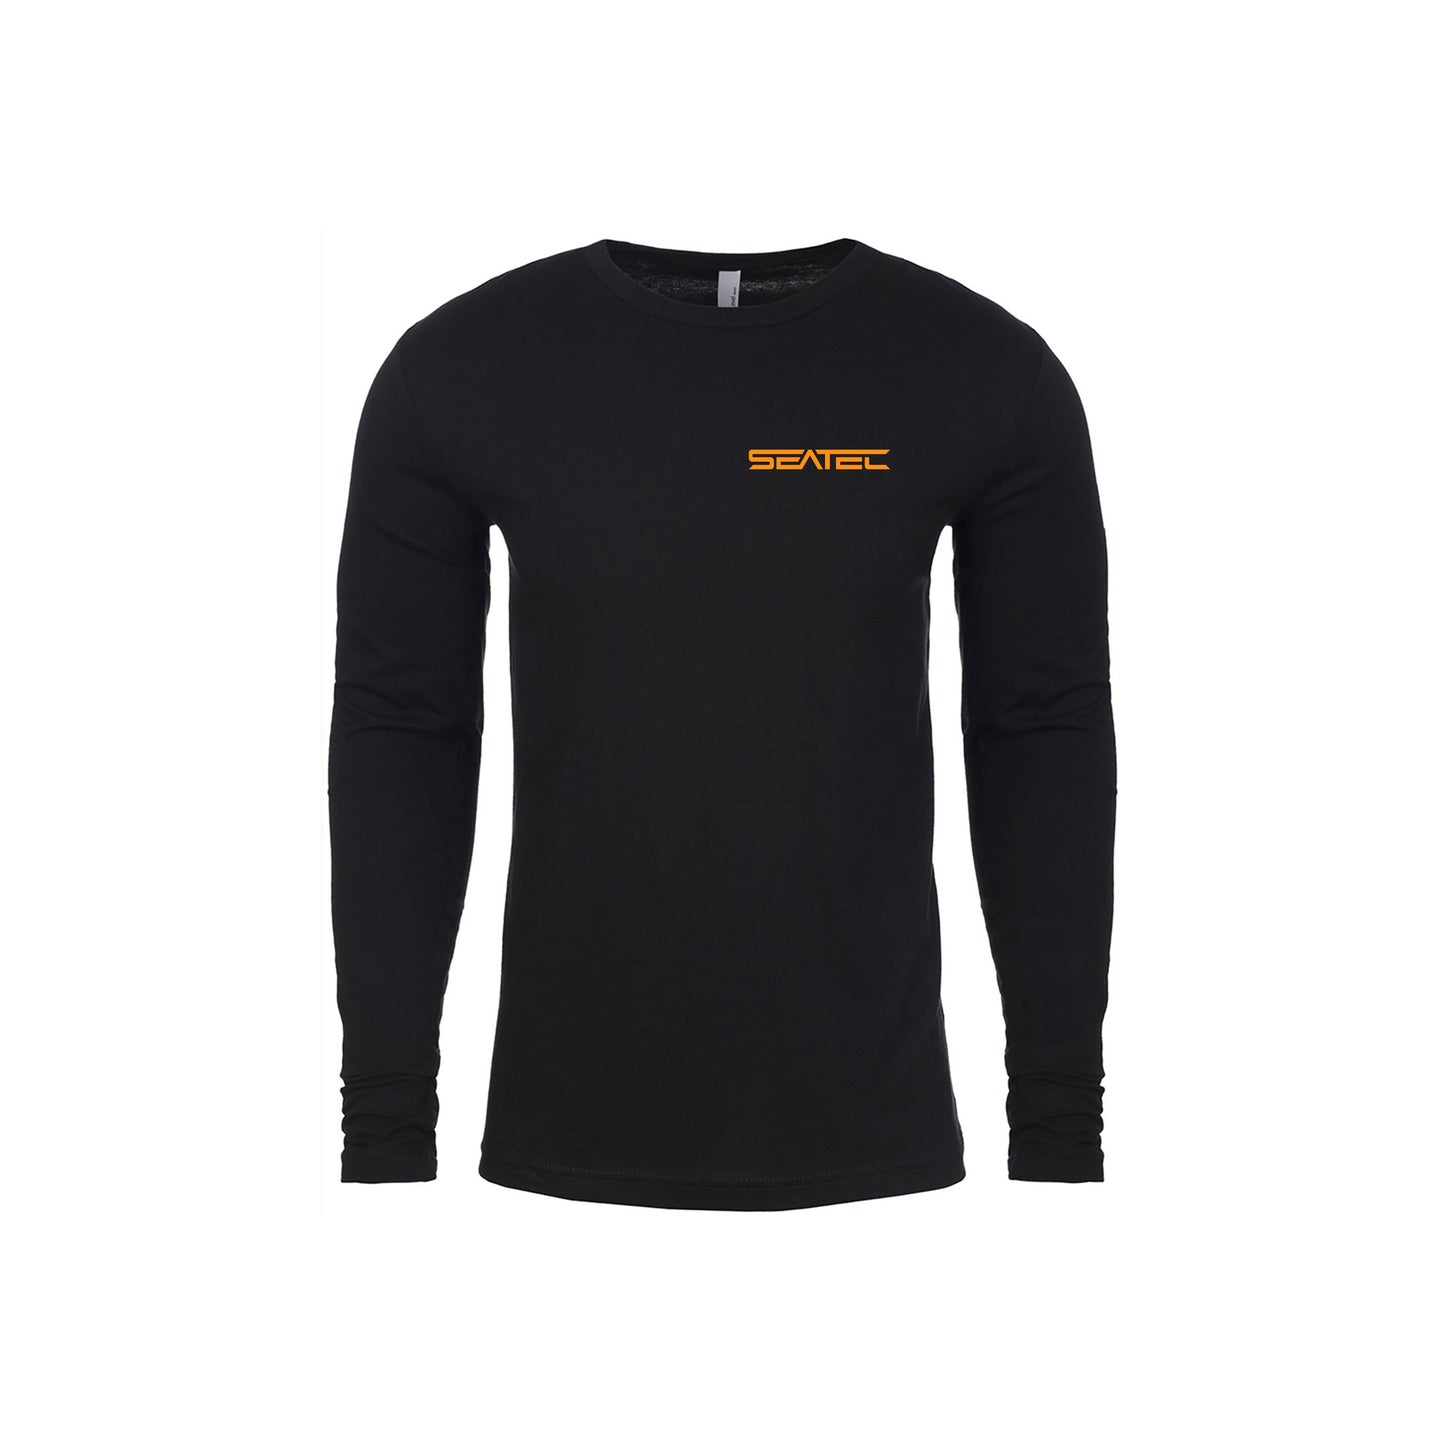 Seatec Outfitters Fly Long Sleeve Performance Shirt - UPF 50+